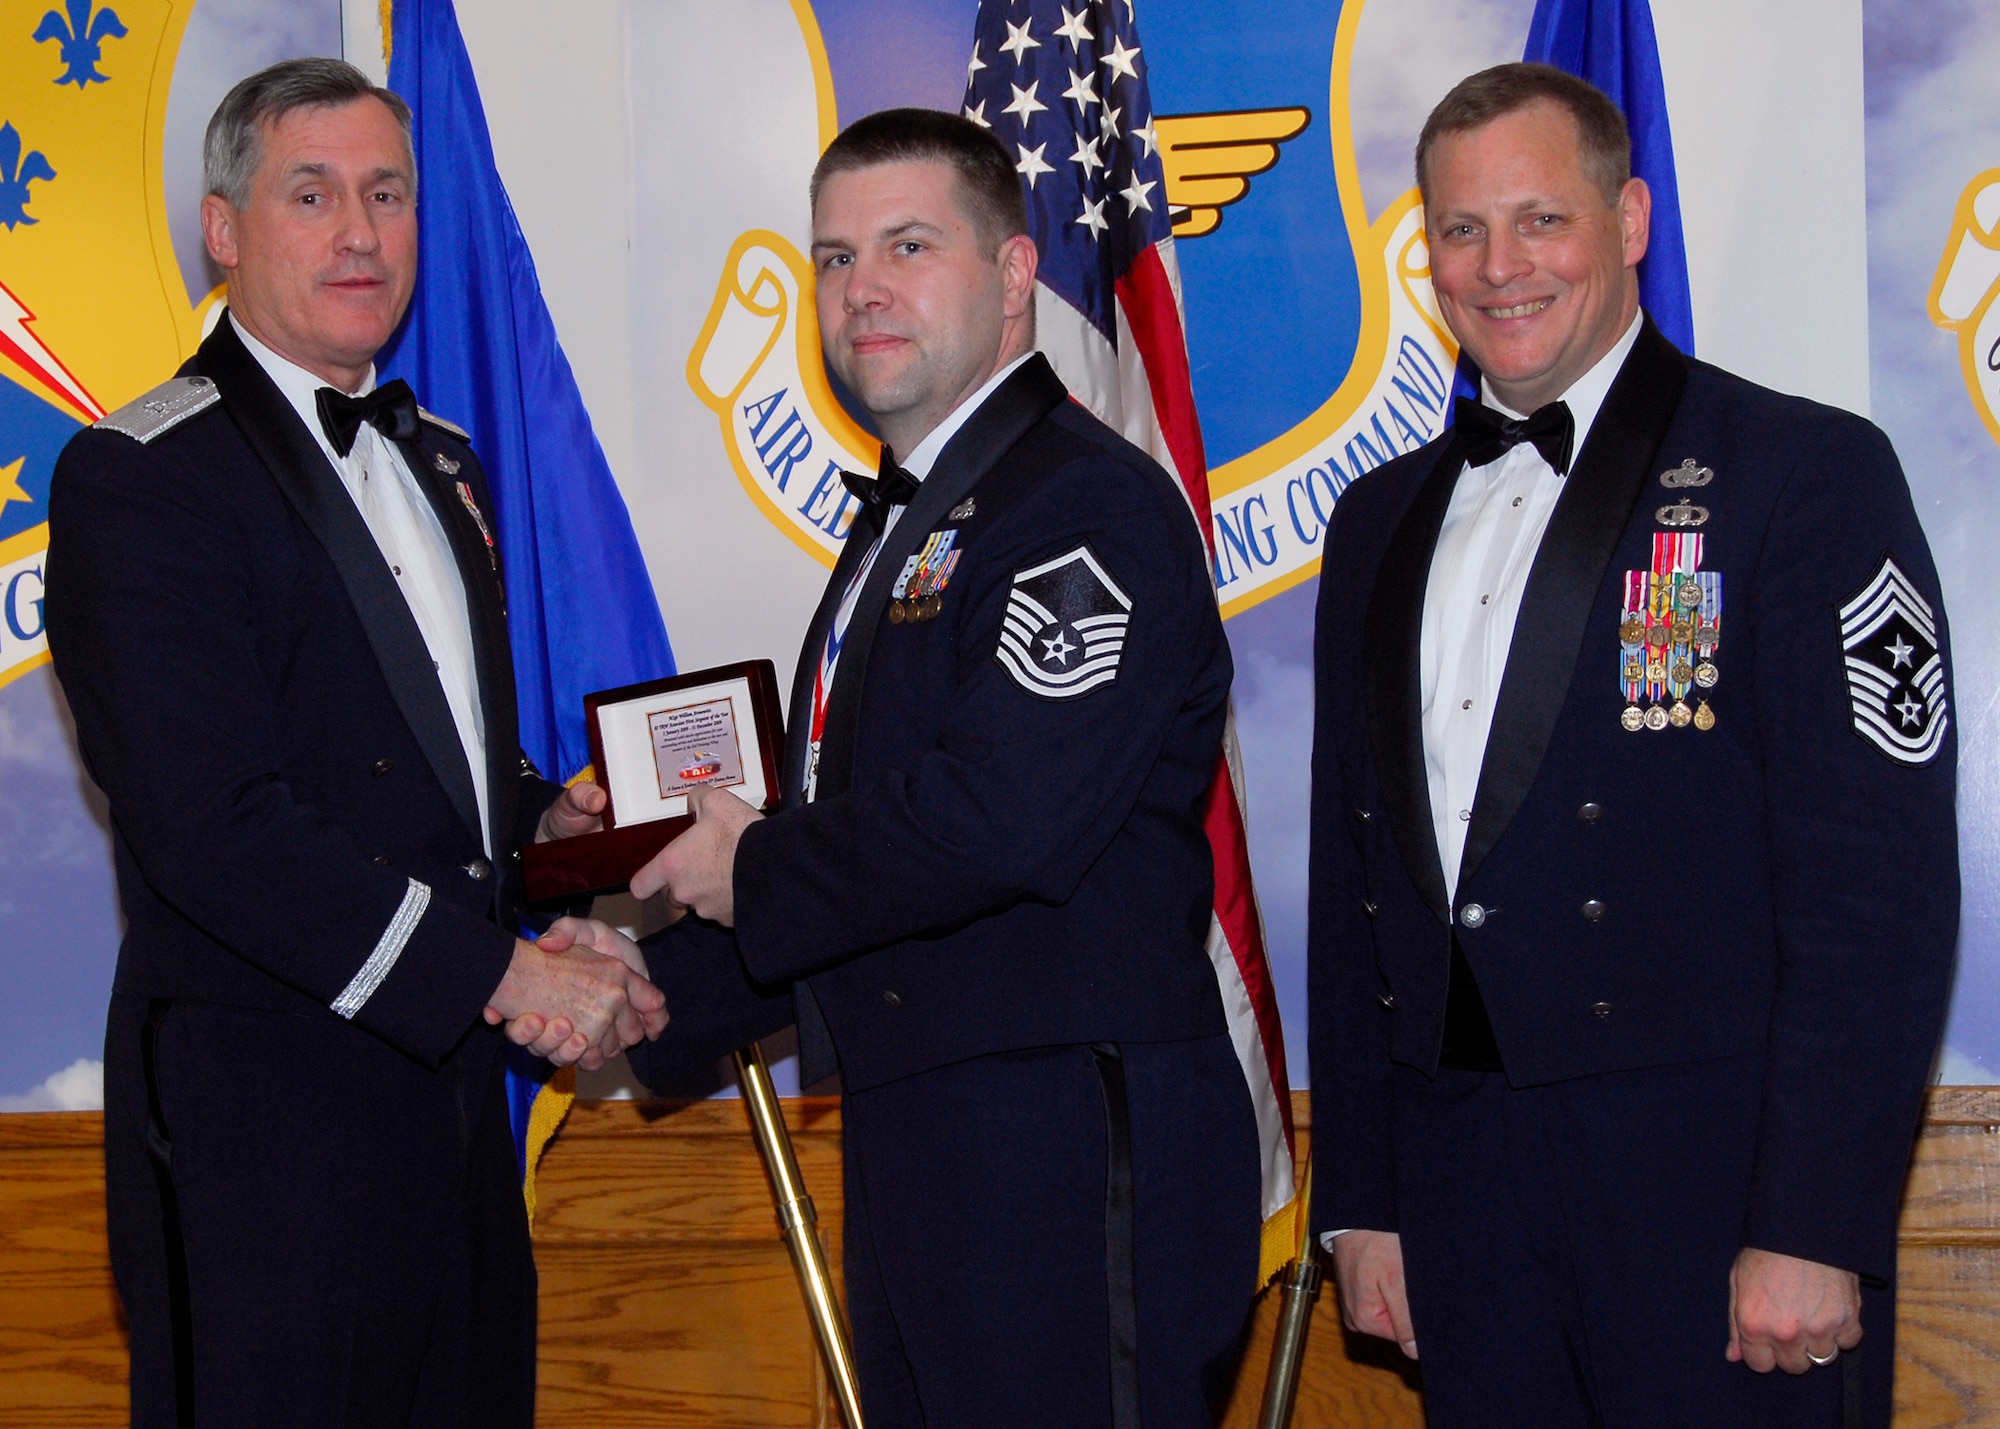 Brig. Gen. O.G. Mannon, 82nd Training Wing commander, presents Master Sgt. William Aronowitz, 82nd Mission Support Group, with the Associate First Sergeant of the Year award March 5 during the 2009 82nd TRW Annual Awards banquet. Also pictured is wing Command Chief, Chief Master Sgt. Kenneth Sallinger. (U.S. Air Force photo/Harry Tonemah) 